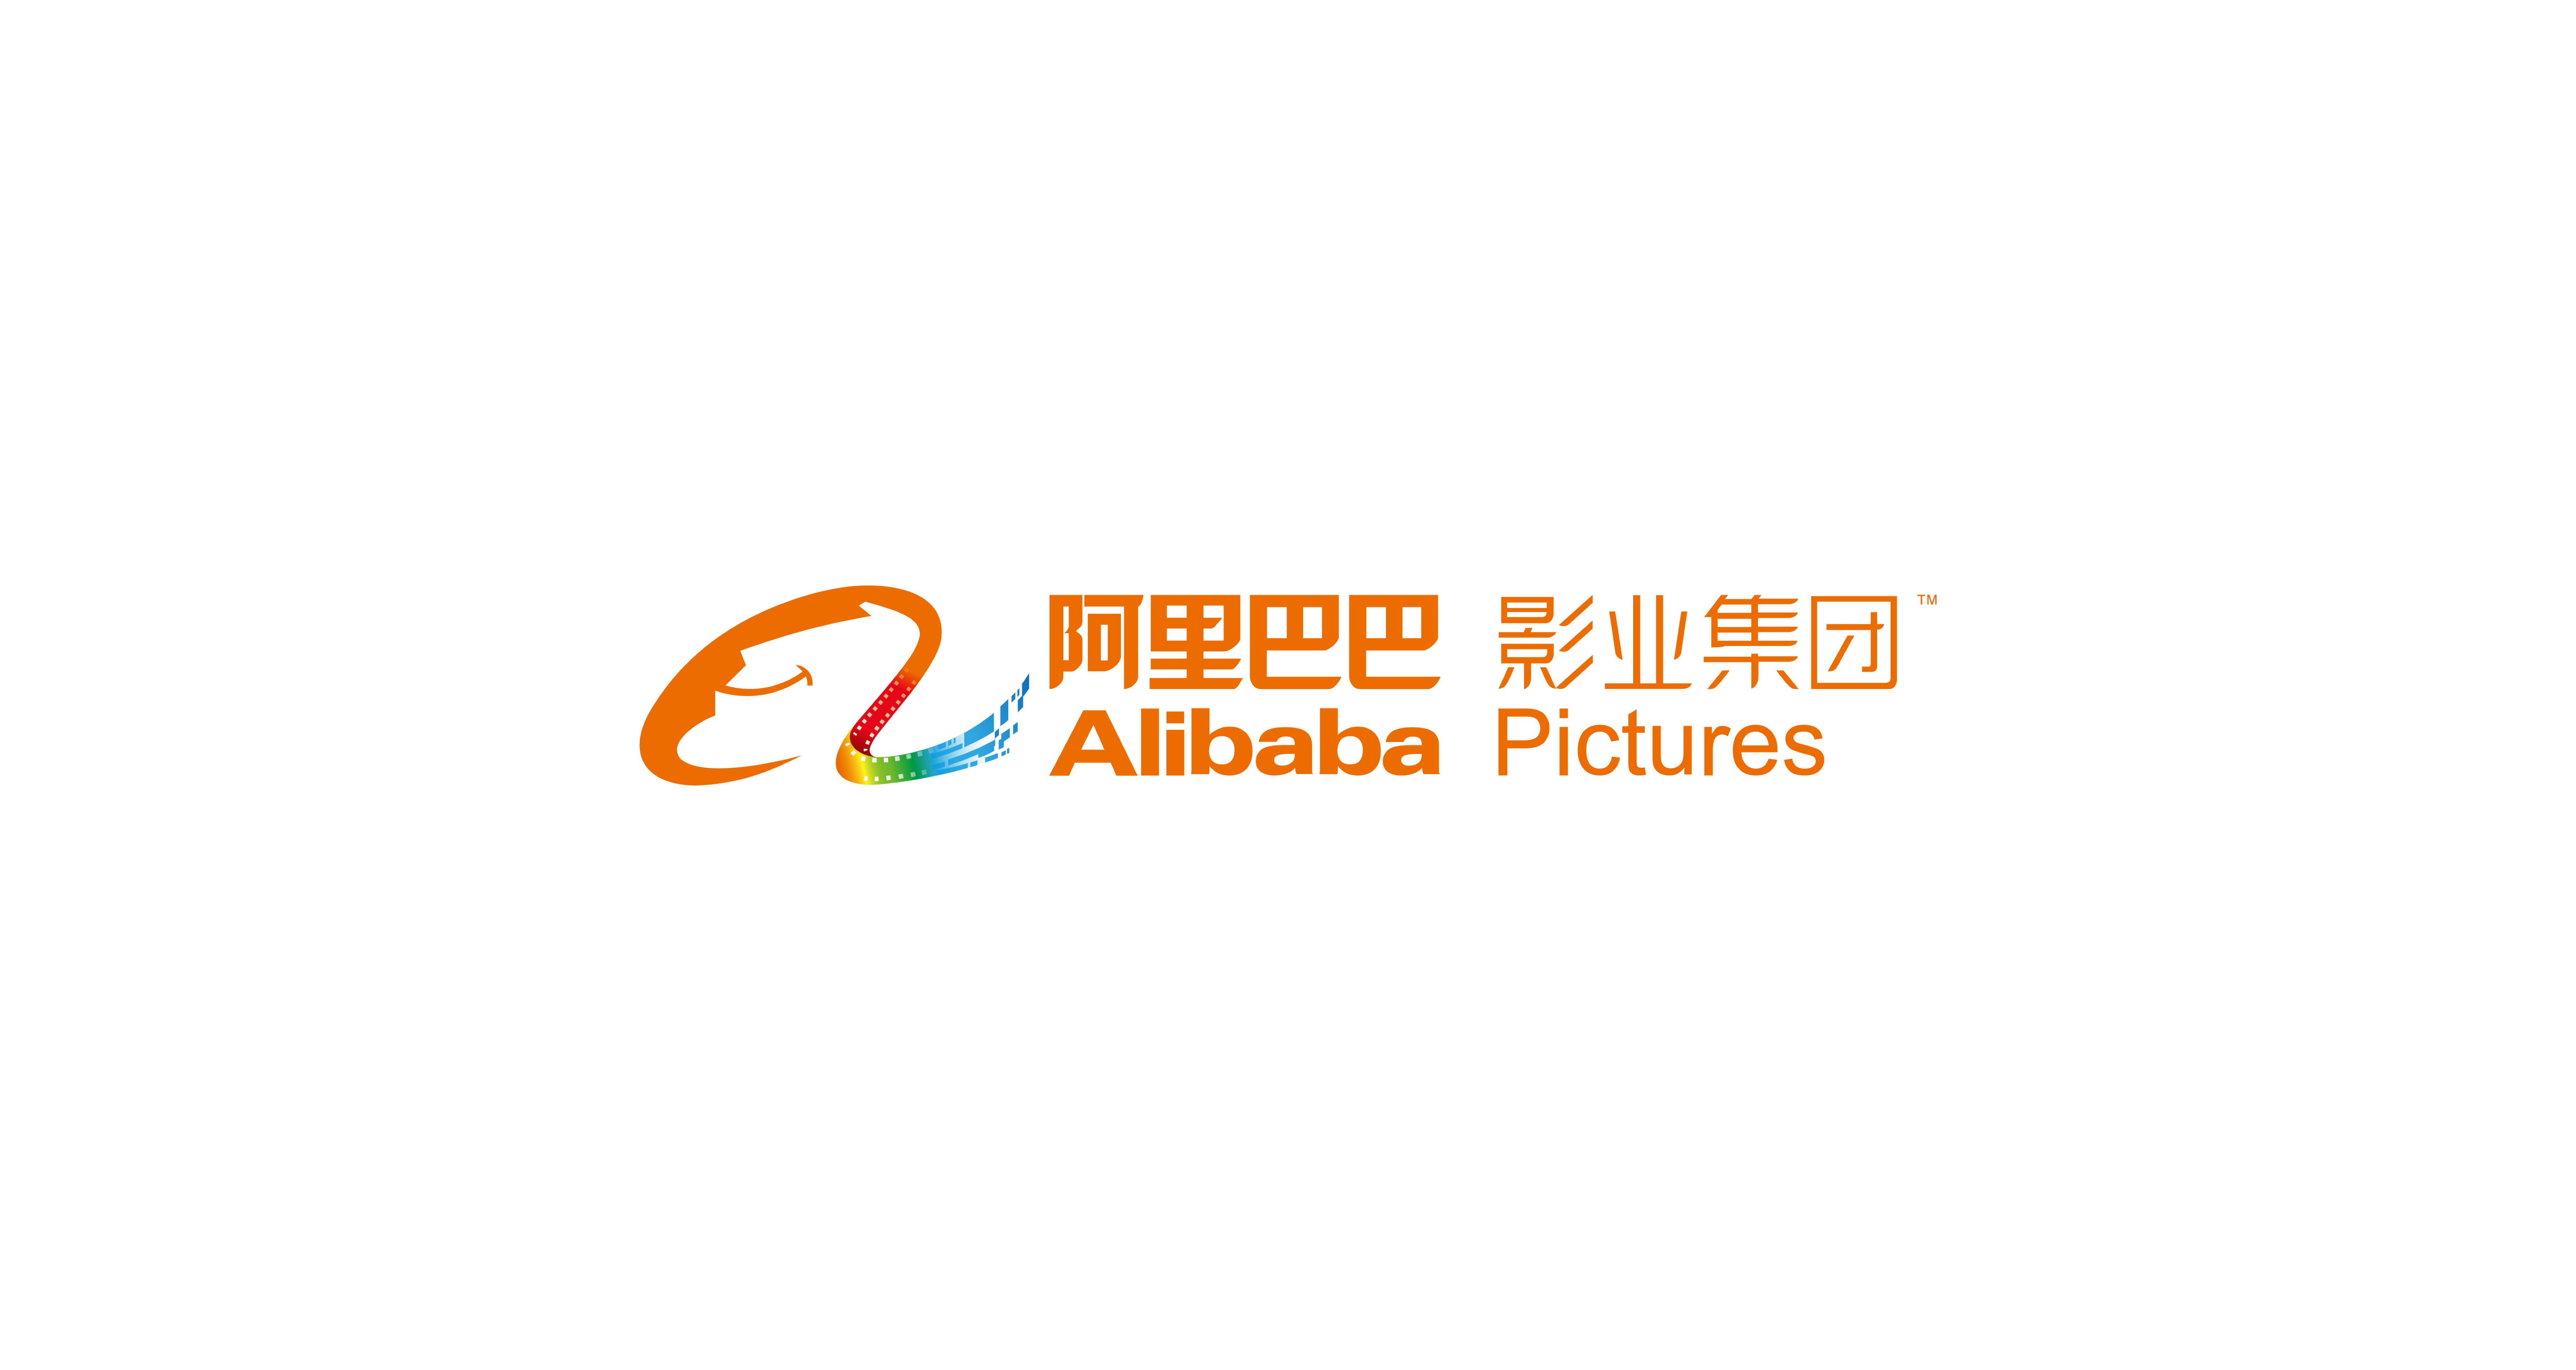 Introduction to Alibaba Group - Alibaba Group